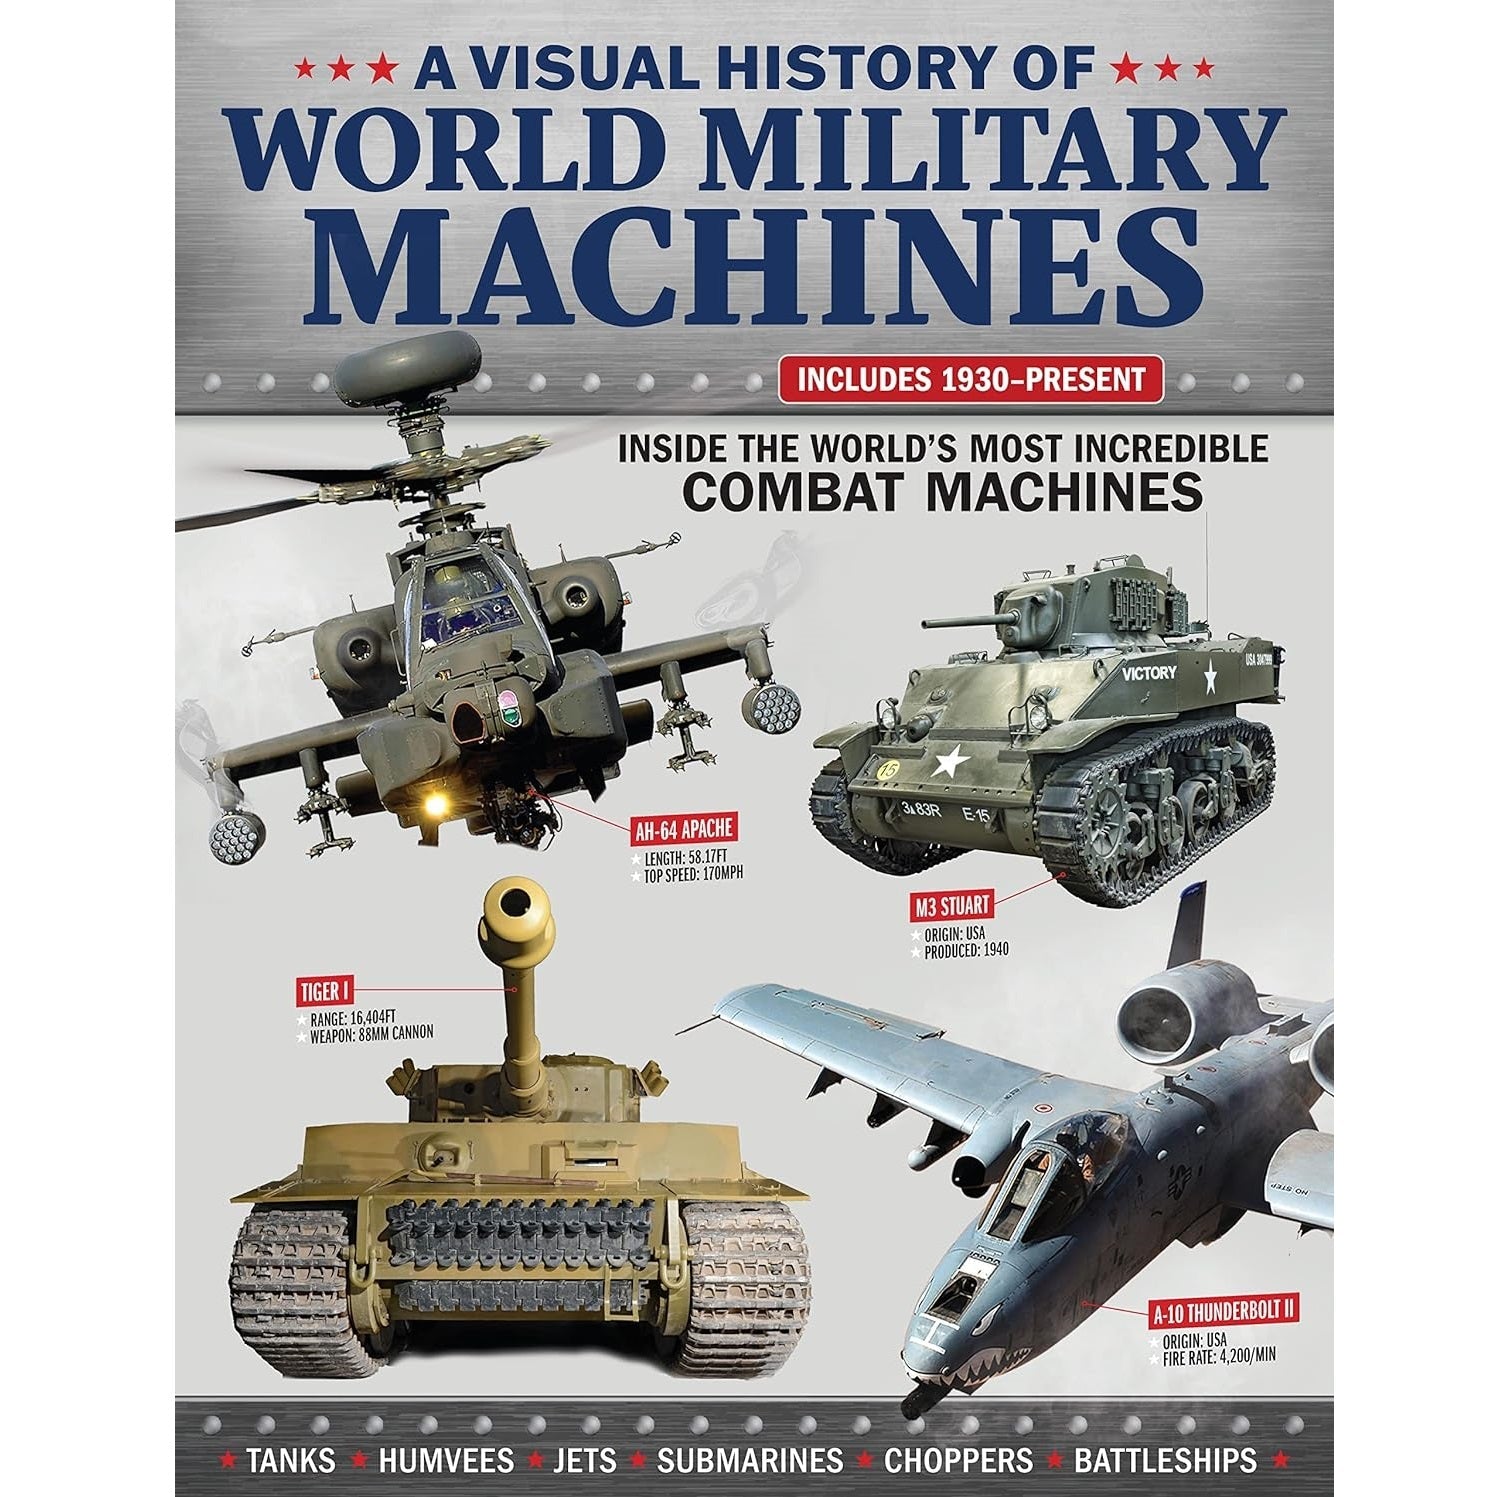 A Visual History of World Military Machines: Inside the World's Most Incredible Combat Machines Book